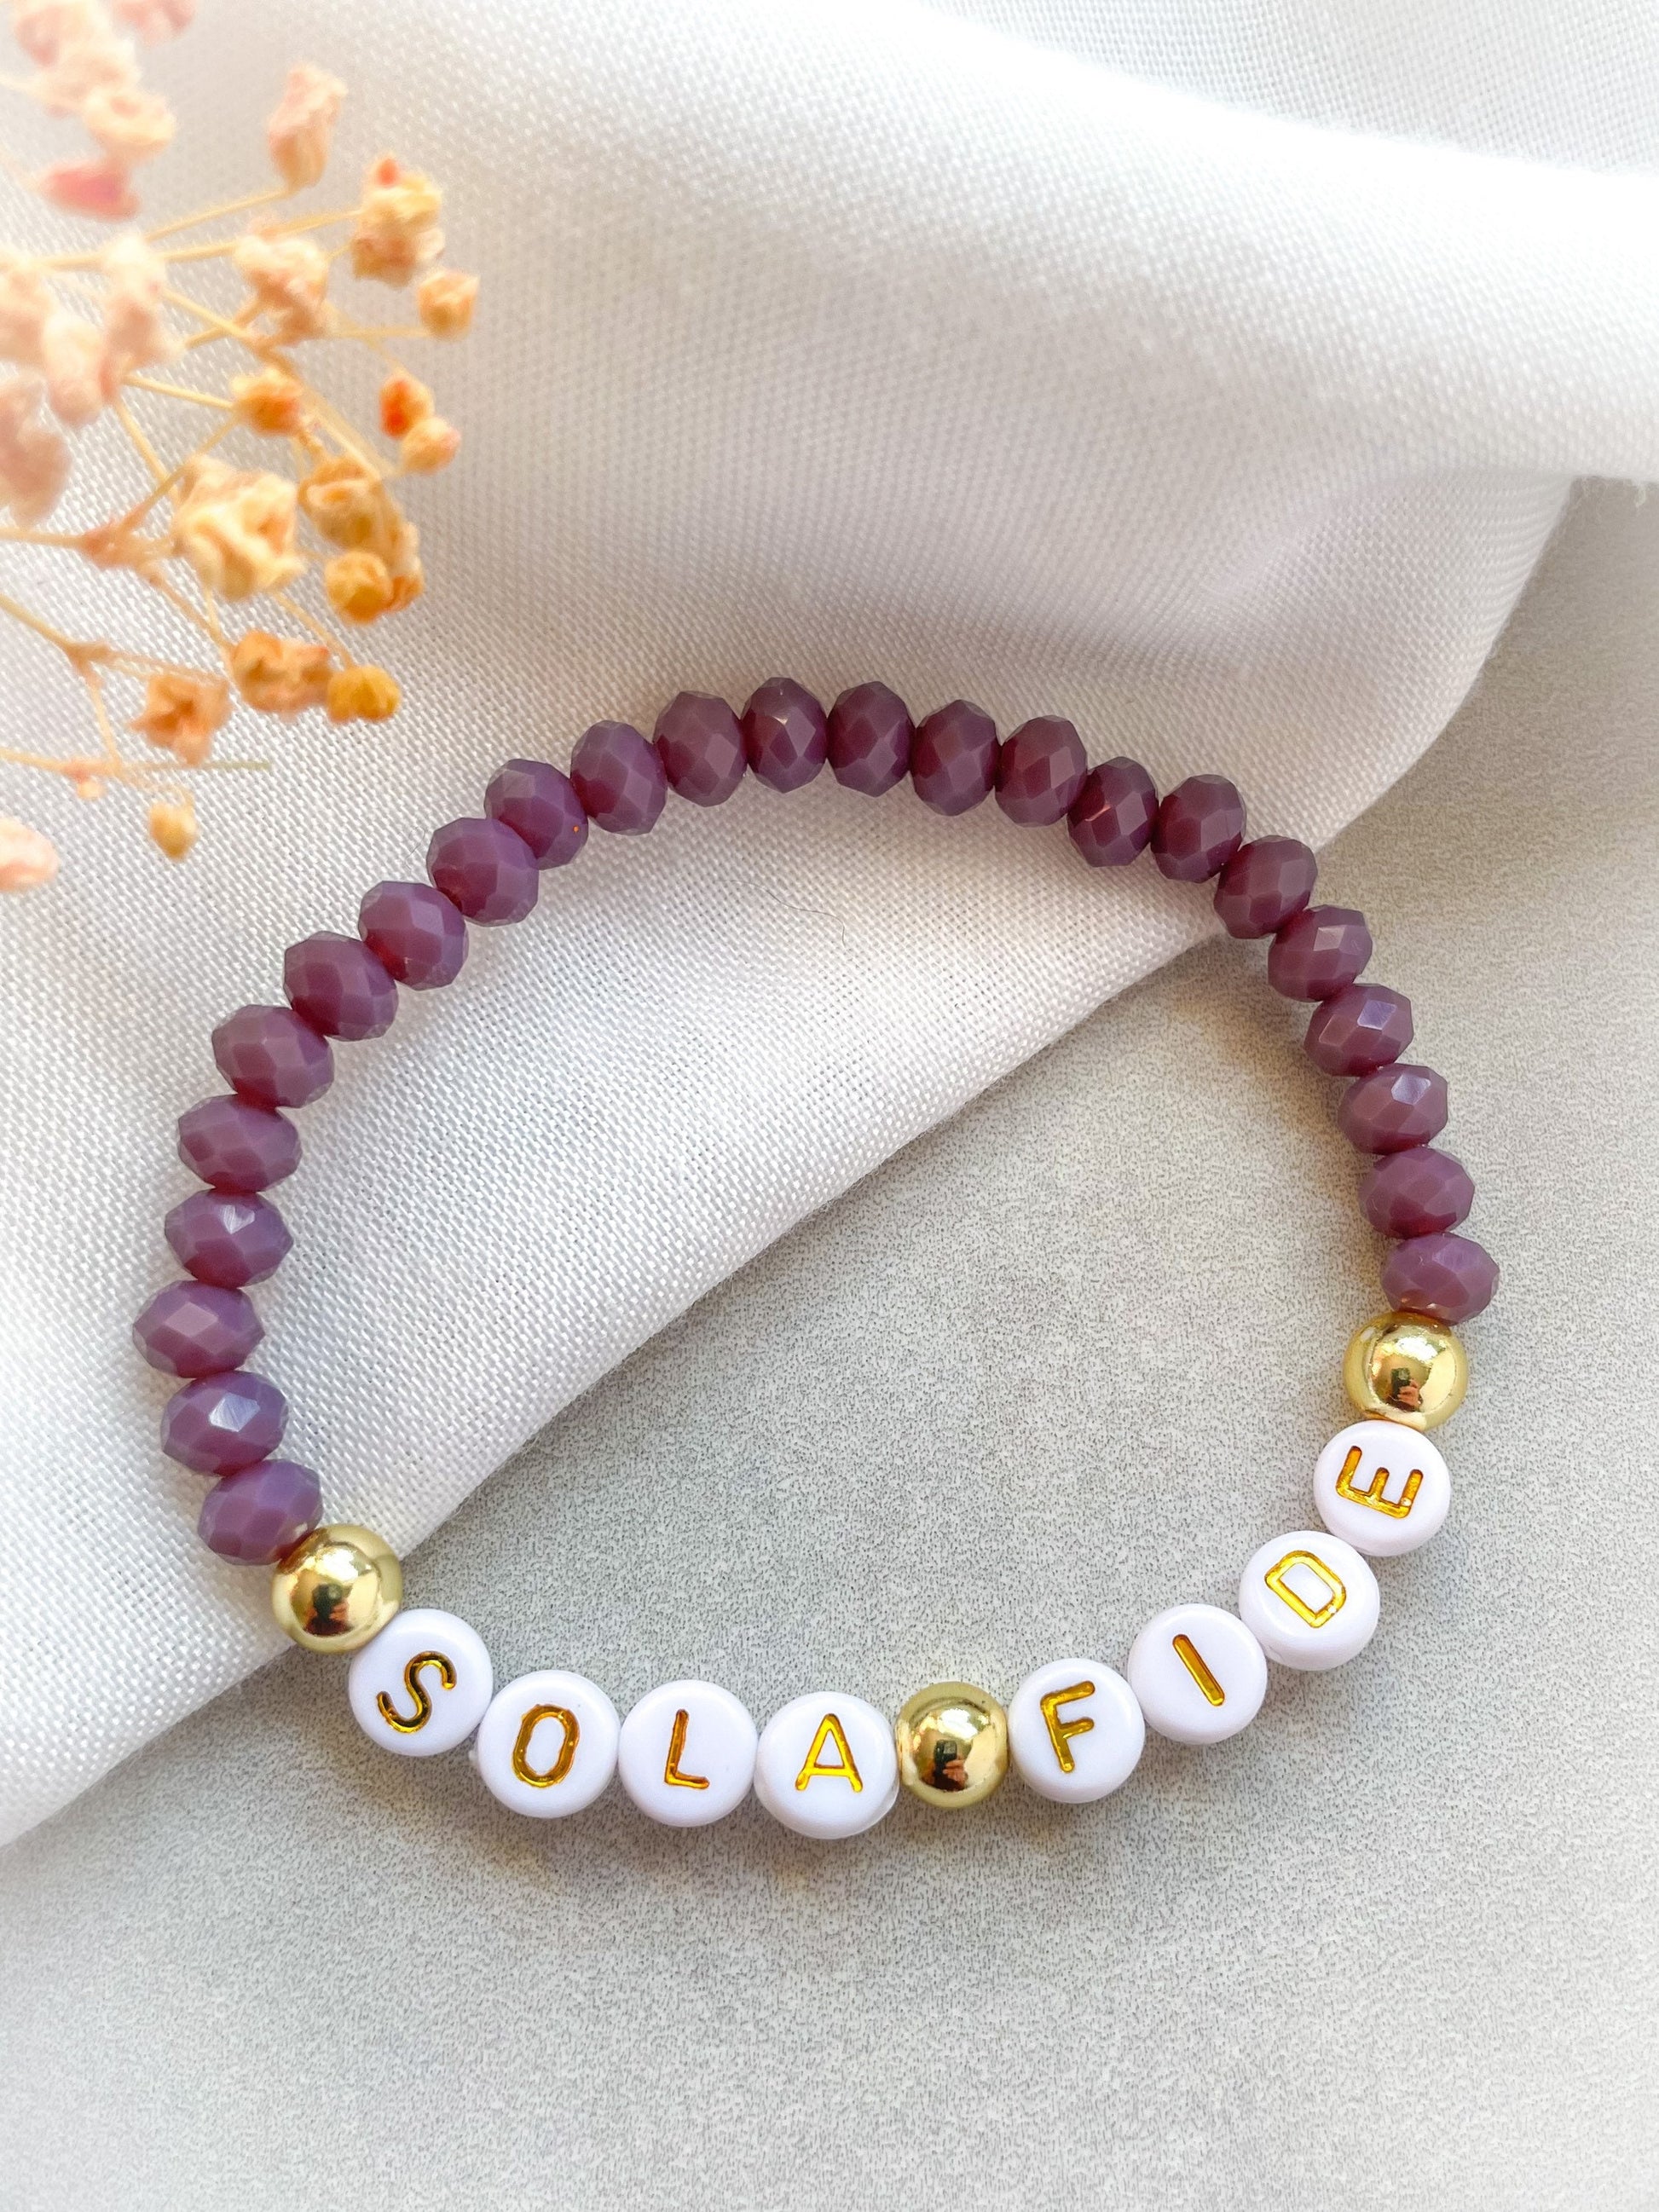 Sola fide bracelet, 5 solas, reformed theology, faith alone, theology matters, Coram Deo, Soli Deo gloria, christian gifts for girls, latin